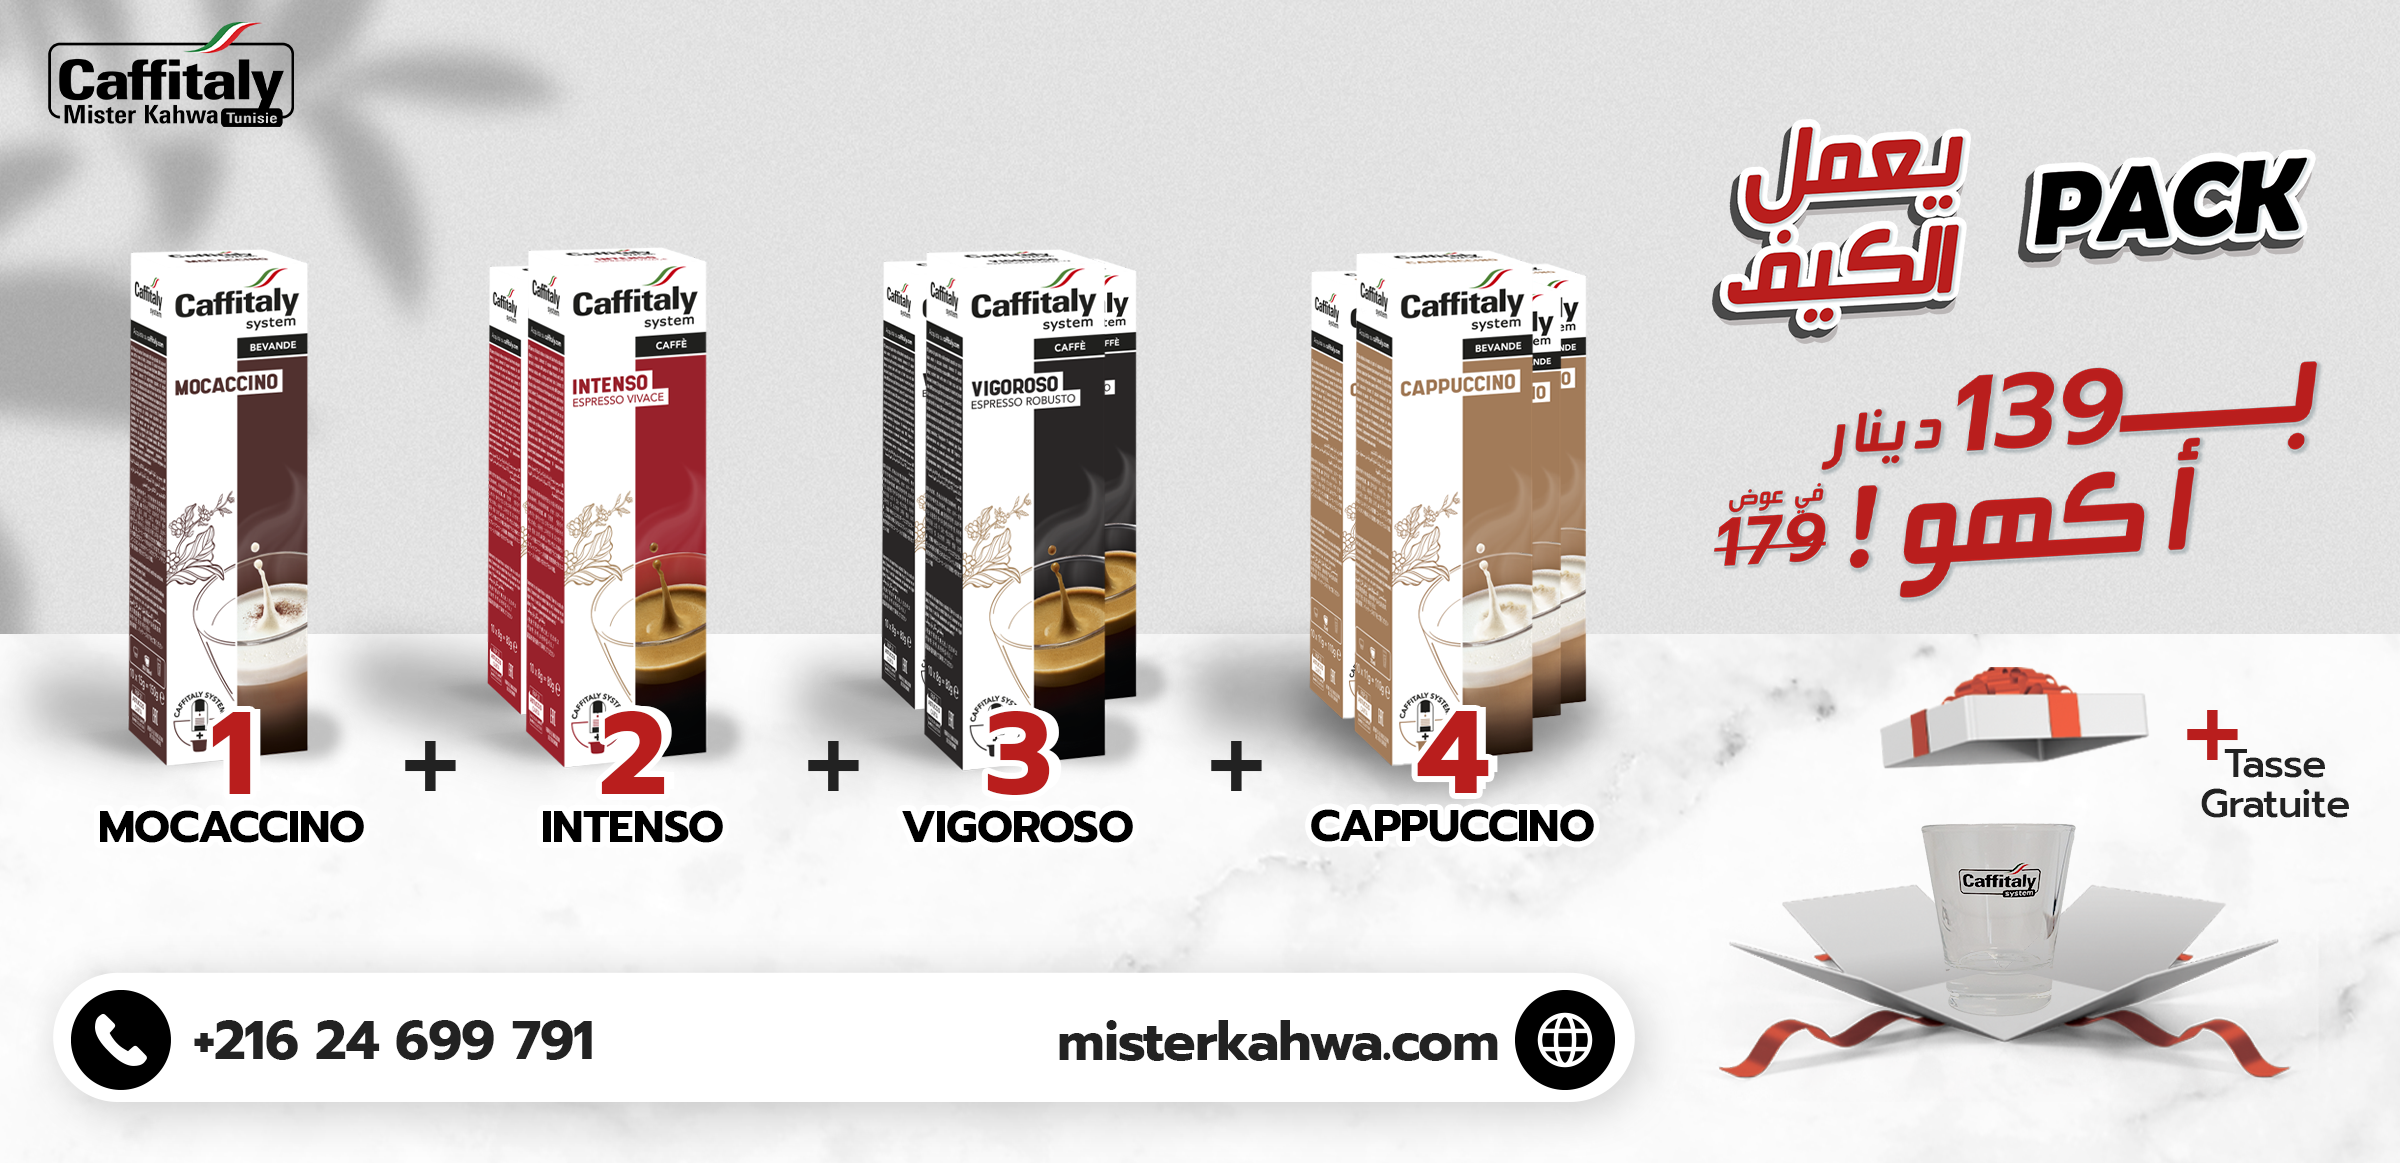 pack-special-caffitaly-misterkahwa